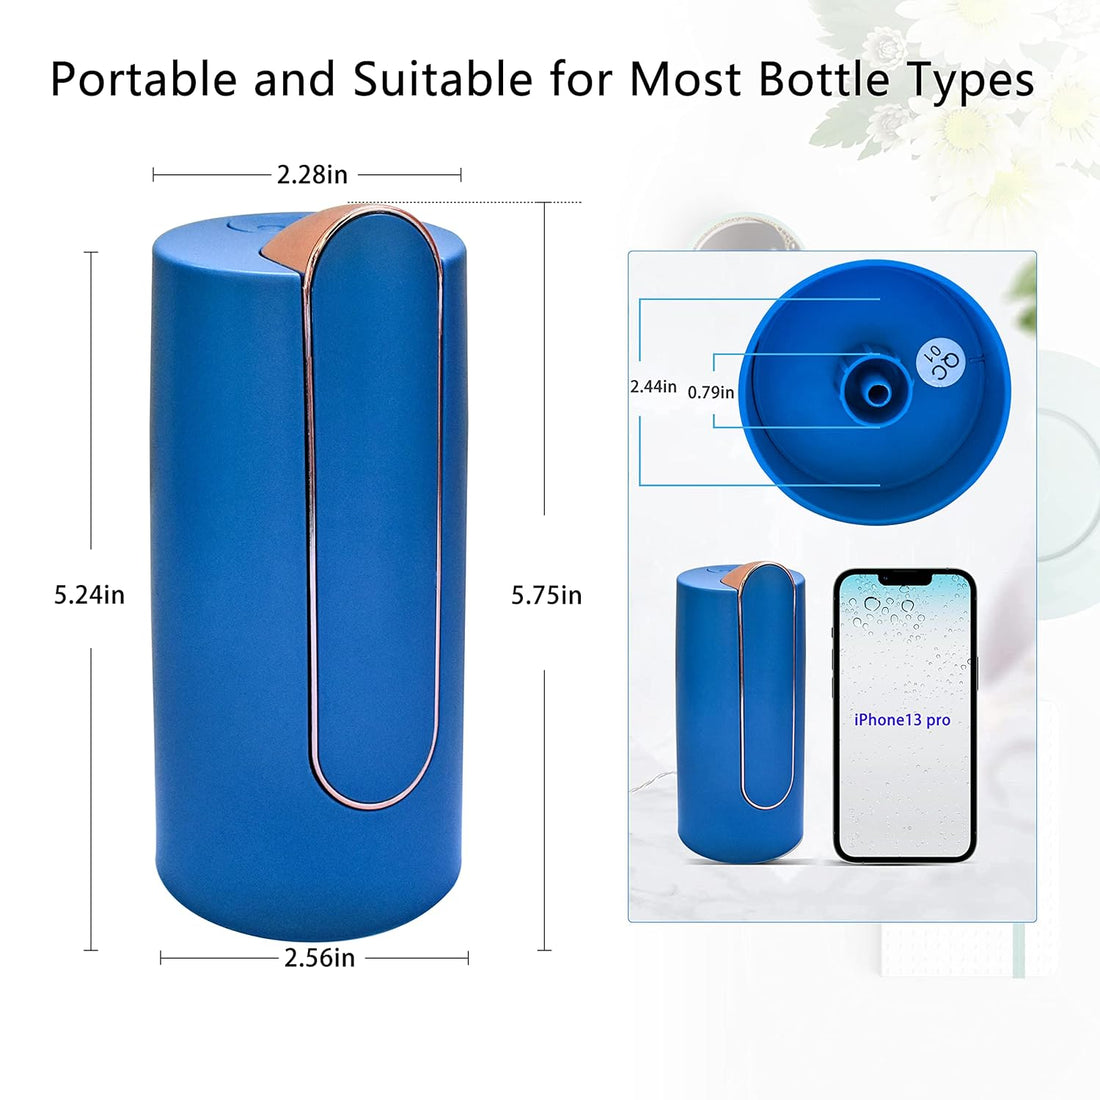 Kneysan Foldable Electric Water Pump with 1800mAH Battery and Type-C USB Charge,5 Gallon Water Bottle Dispenser,Automatic Portable Drinking Water Jug Dispenser for Home Kitchen Office Camping(Blue)